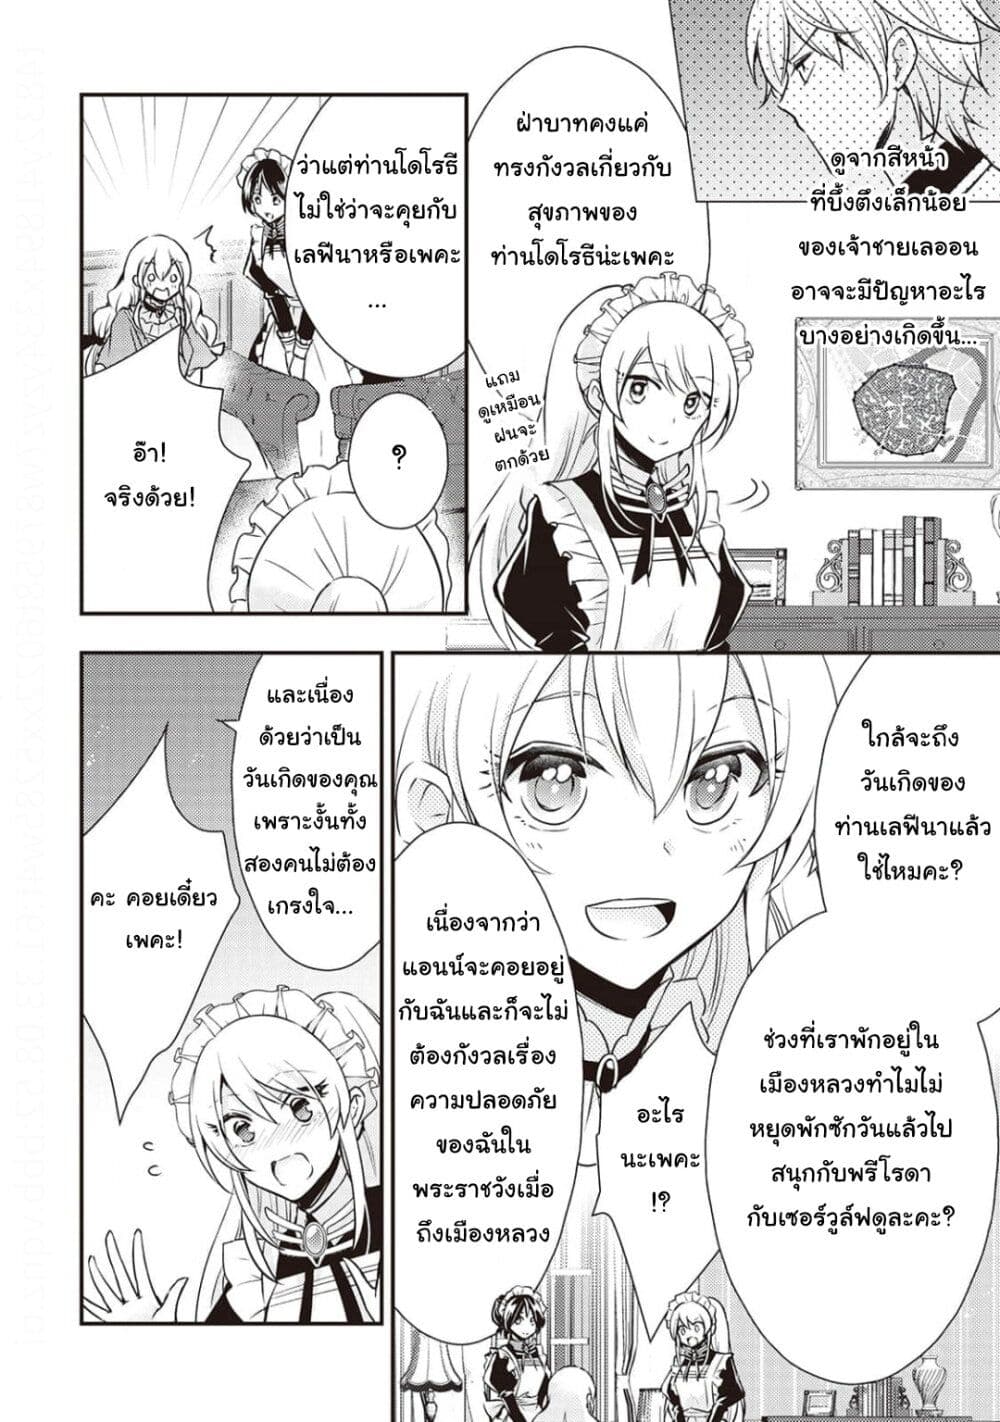 The Role of the Villainess Is No More! ตอนที่ 10 (10)